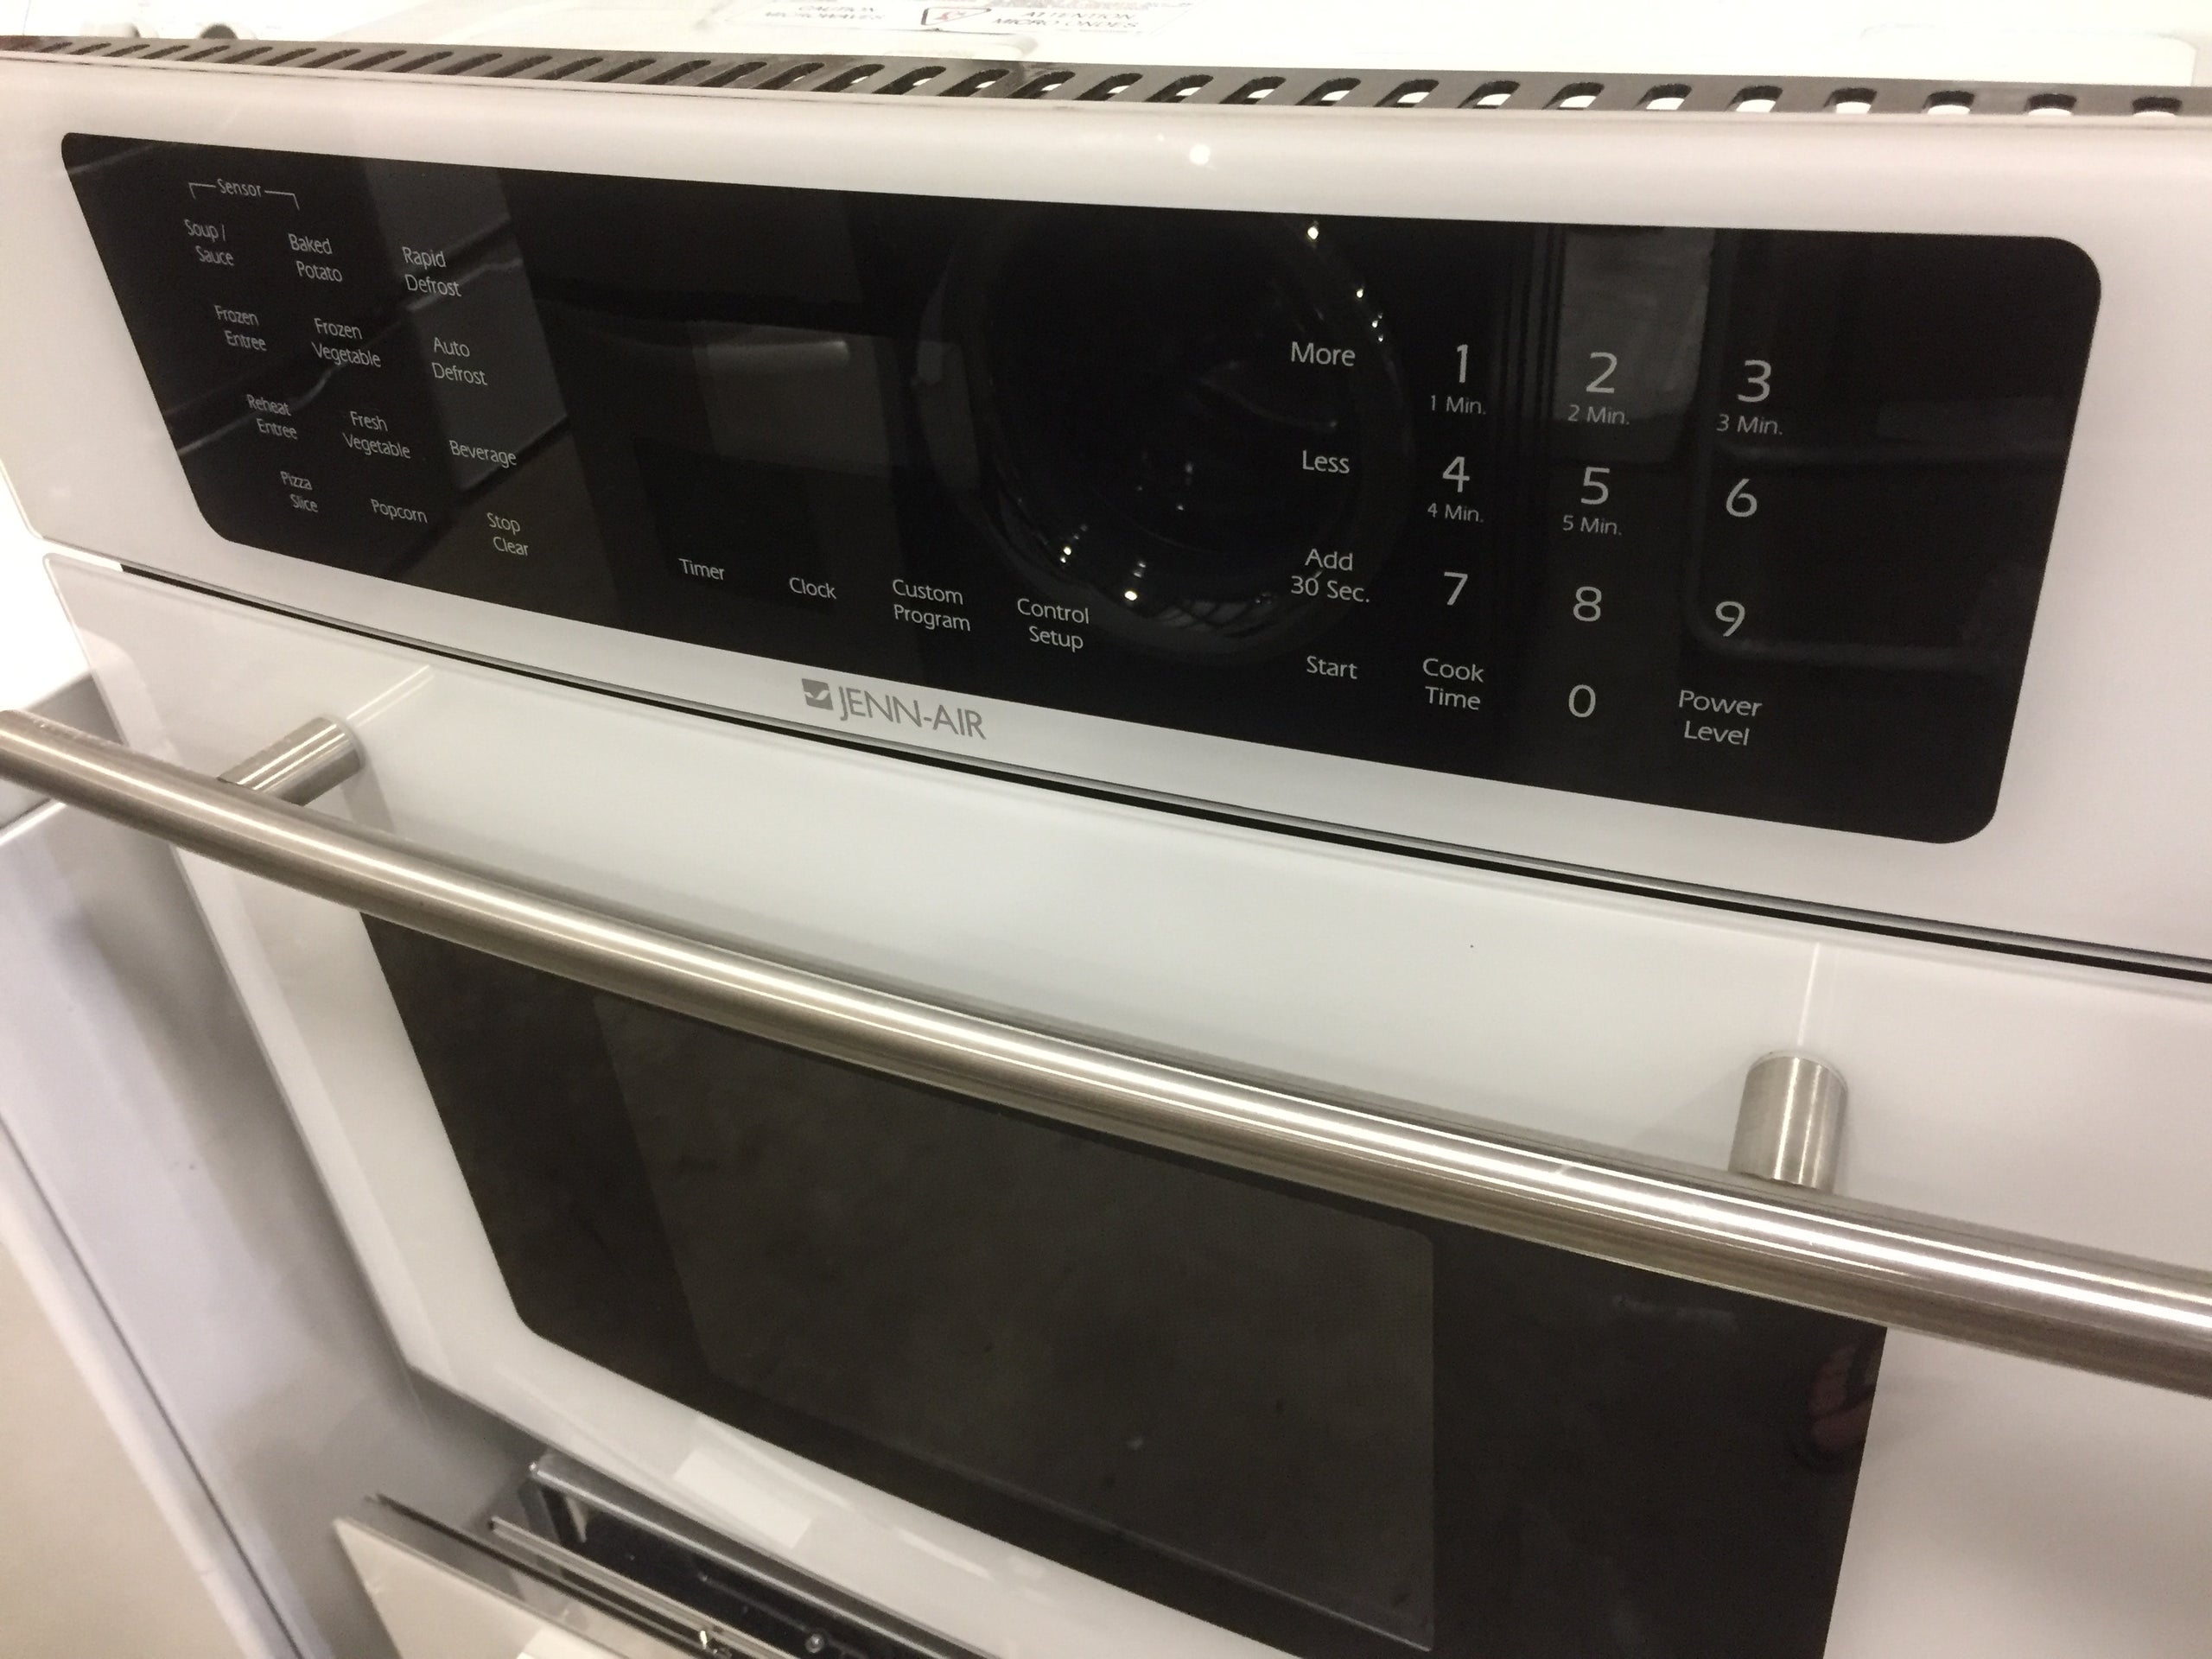 Jenn-Air Microwave Oven Built-in Electric